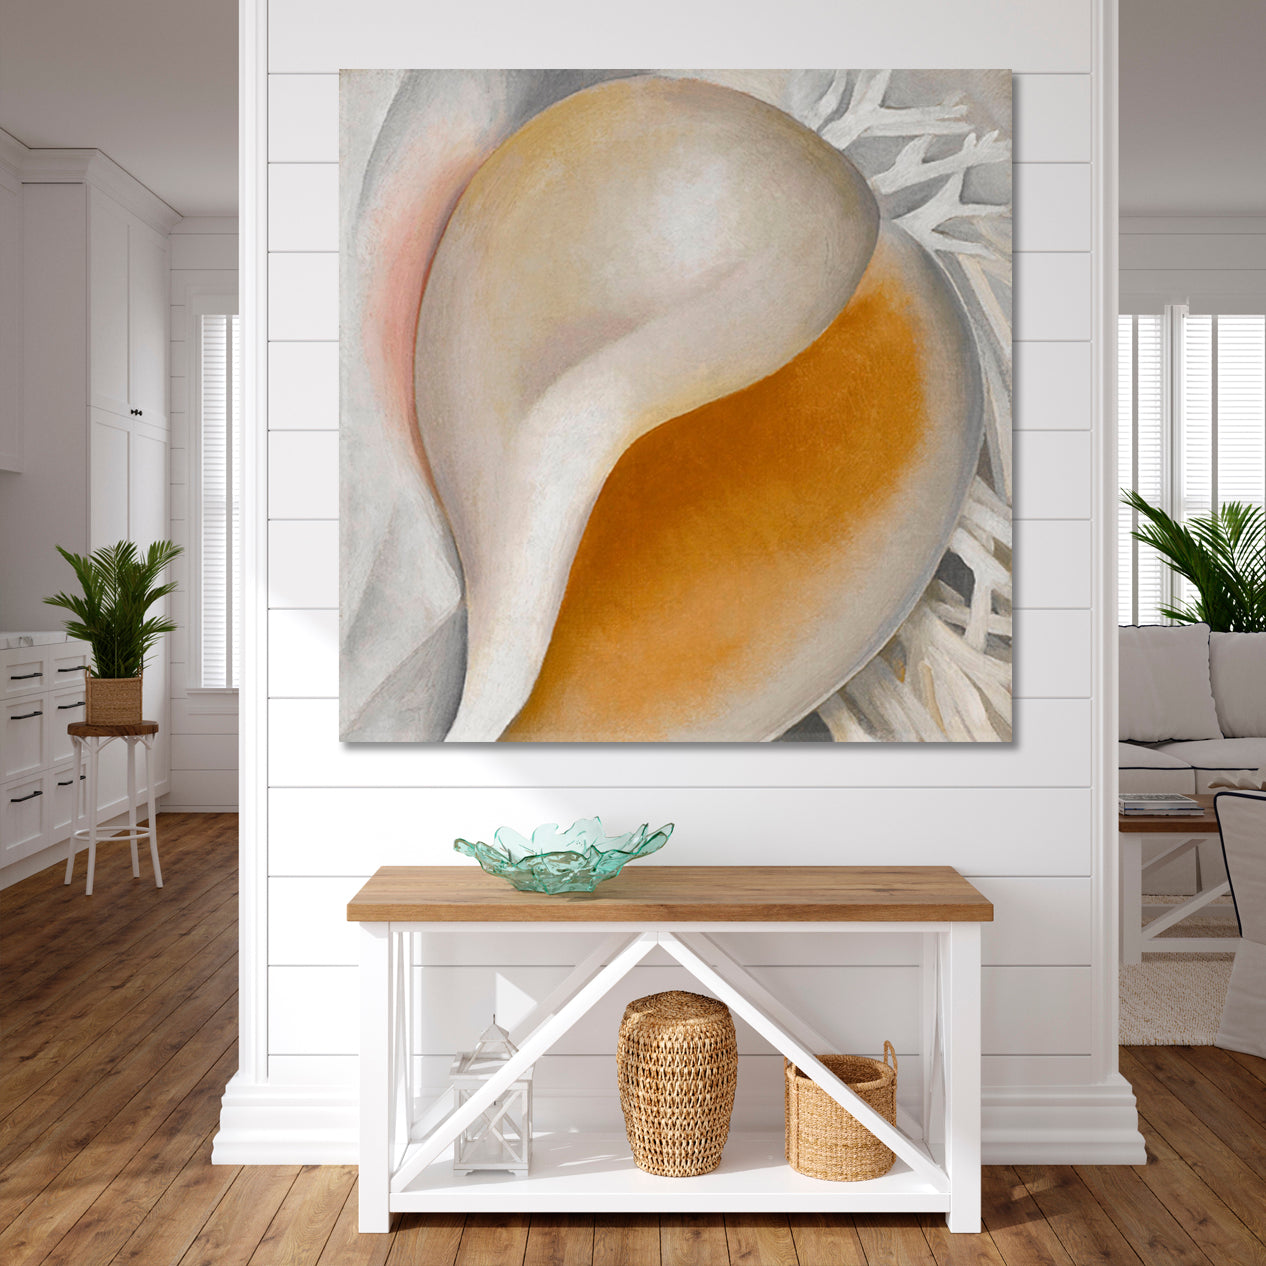 SHELLS Sea Life Natural Instinct Abstract Forms - Square Abstract Art Print Artesty 1 Panel 12"x12" 